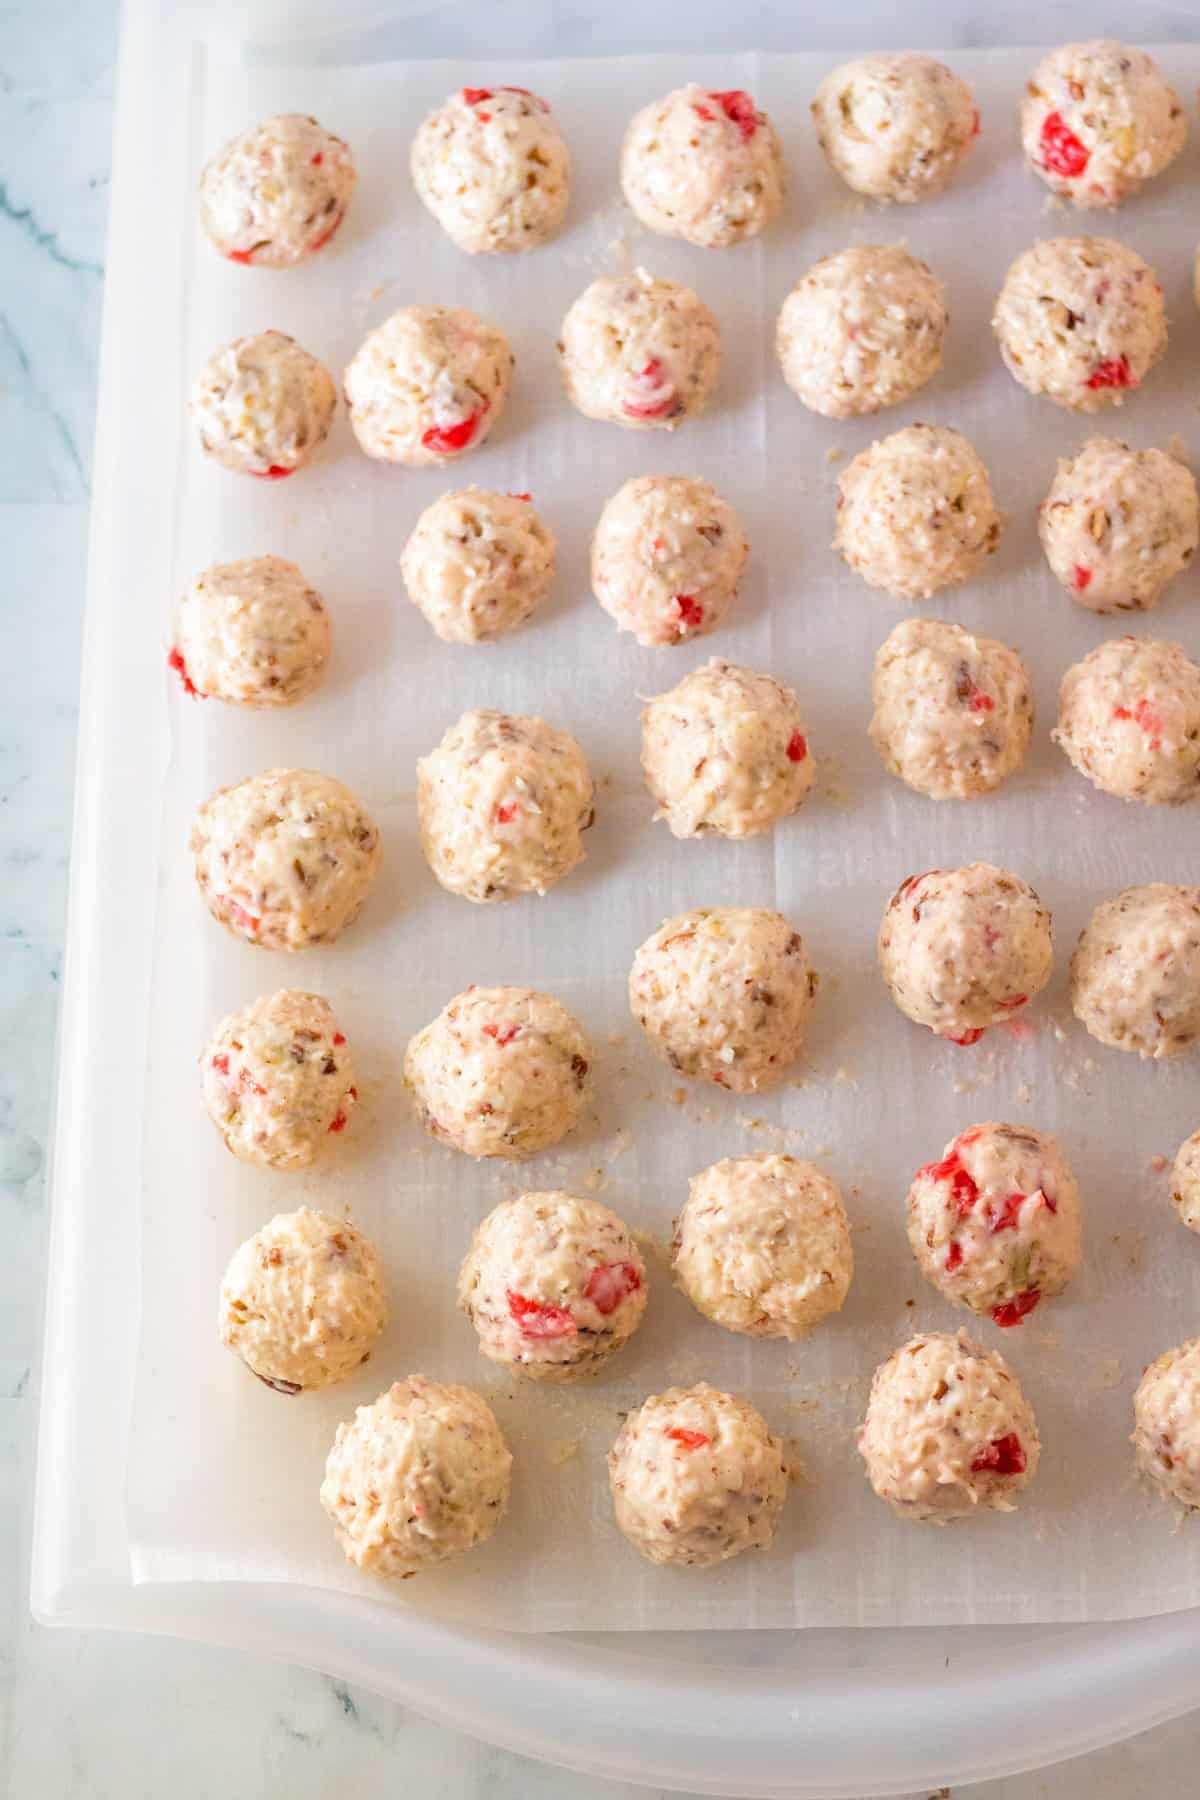 Cherry coconut pecan candy balls on lined baking sheet.